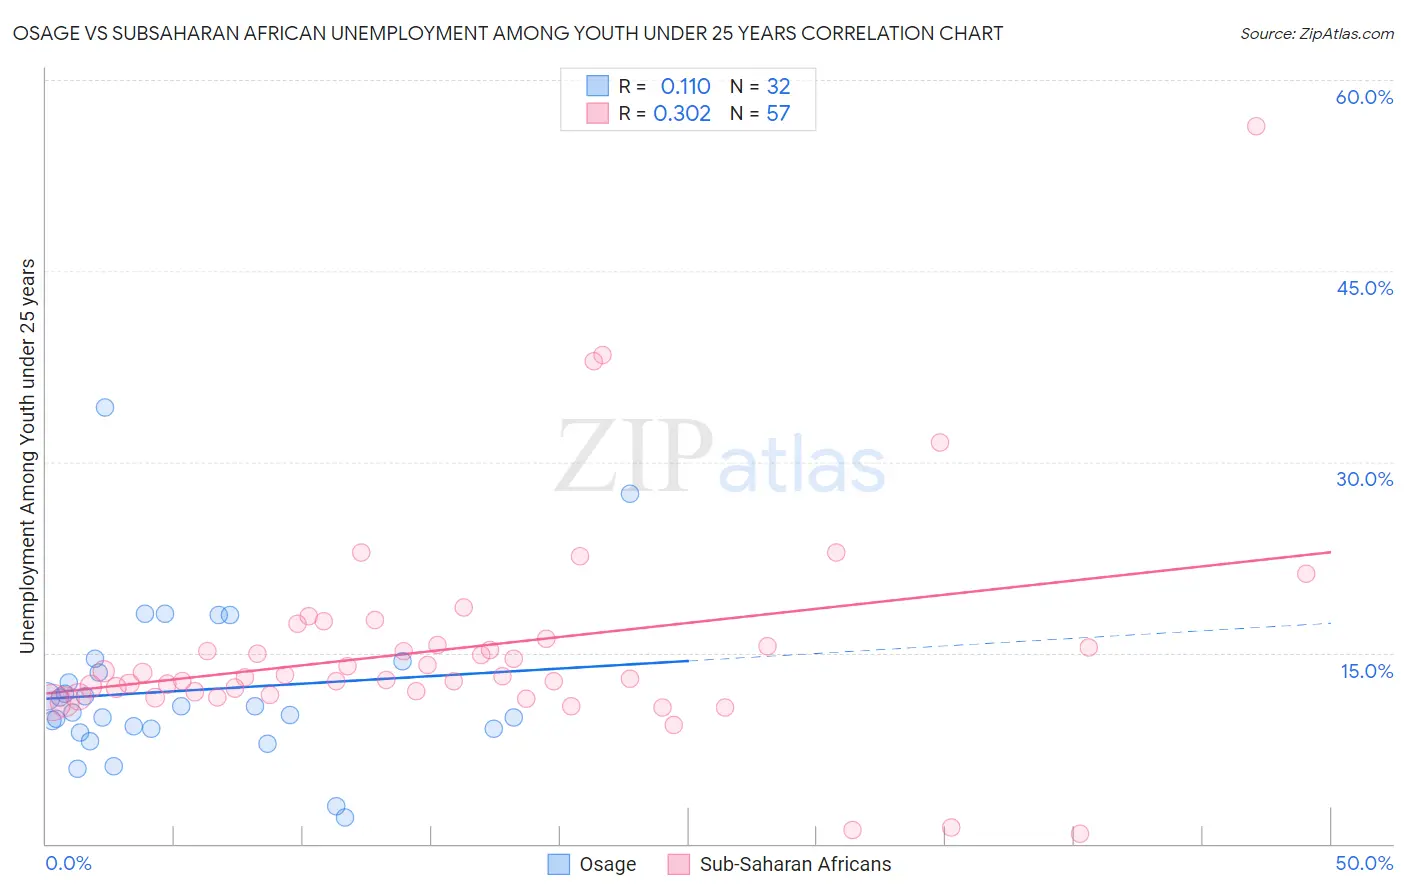 Osage vs Subsaharan African Unemployment Among Youth under 25 years